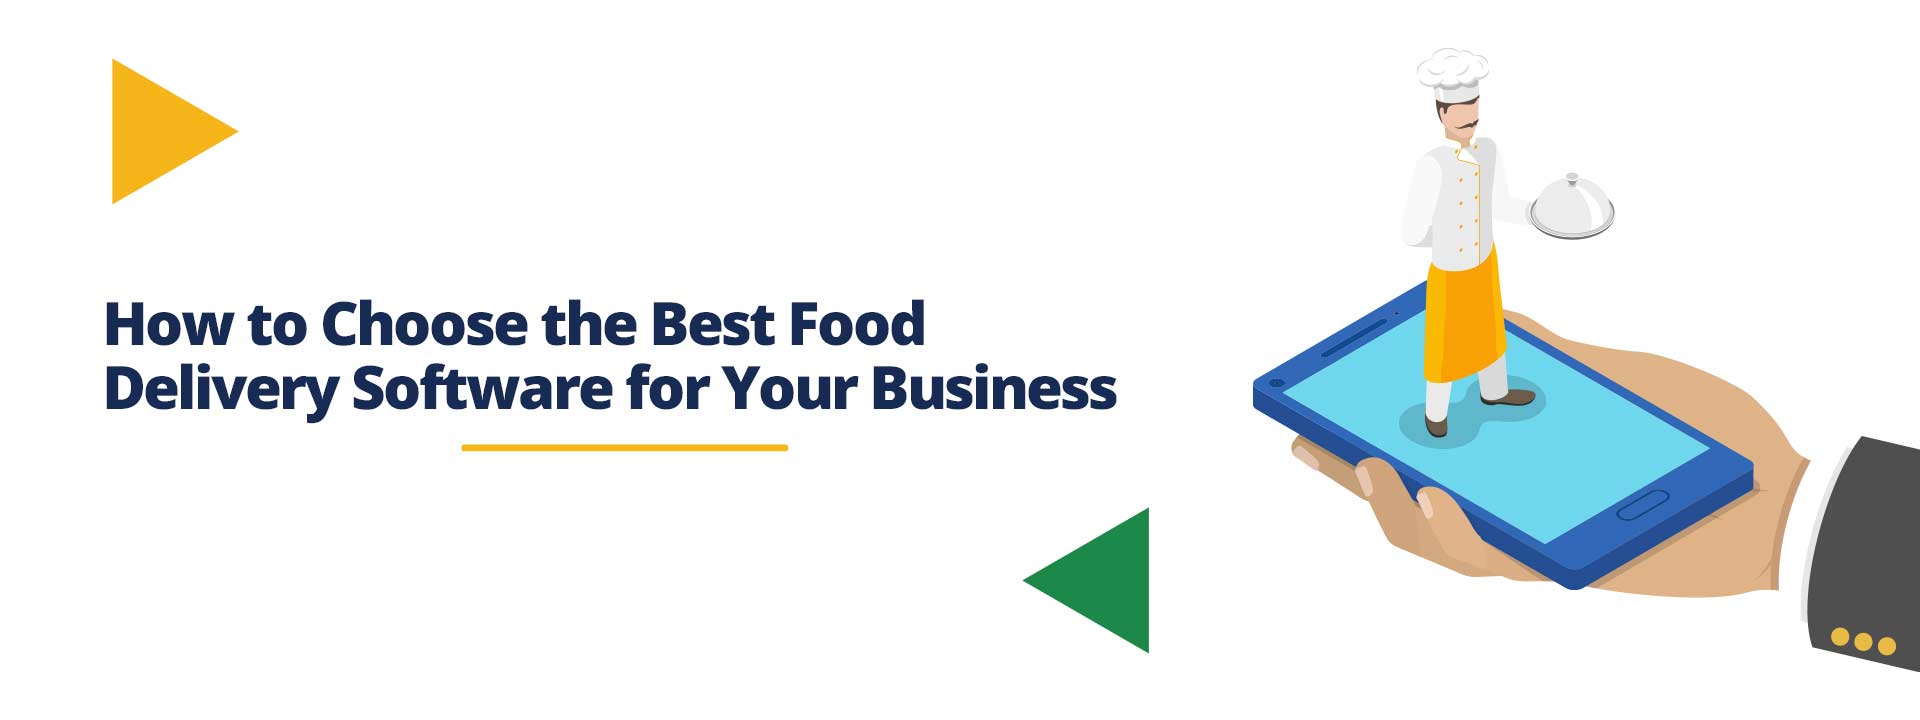 Best Food Delivery Software for Your Business